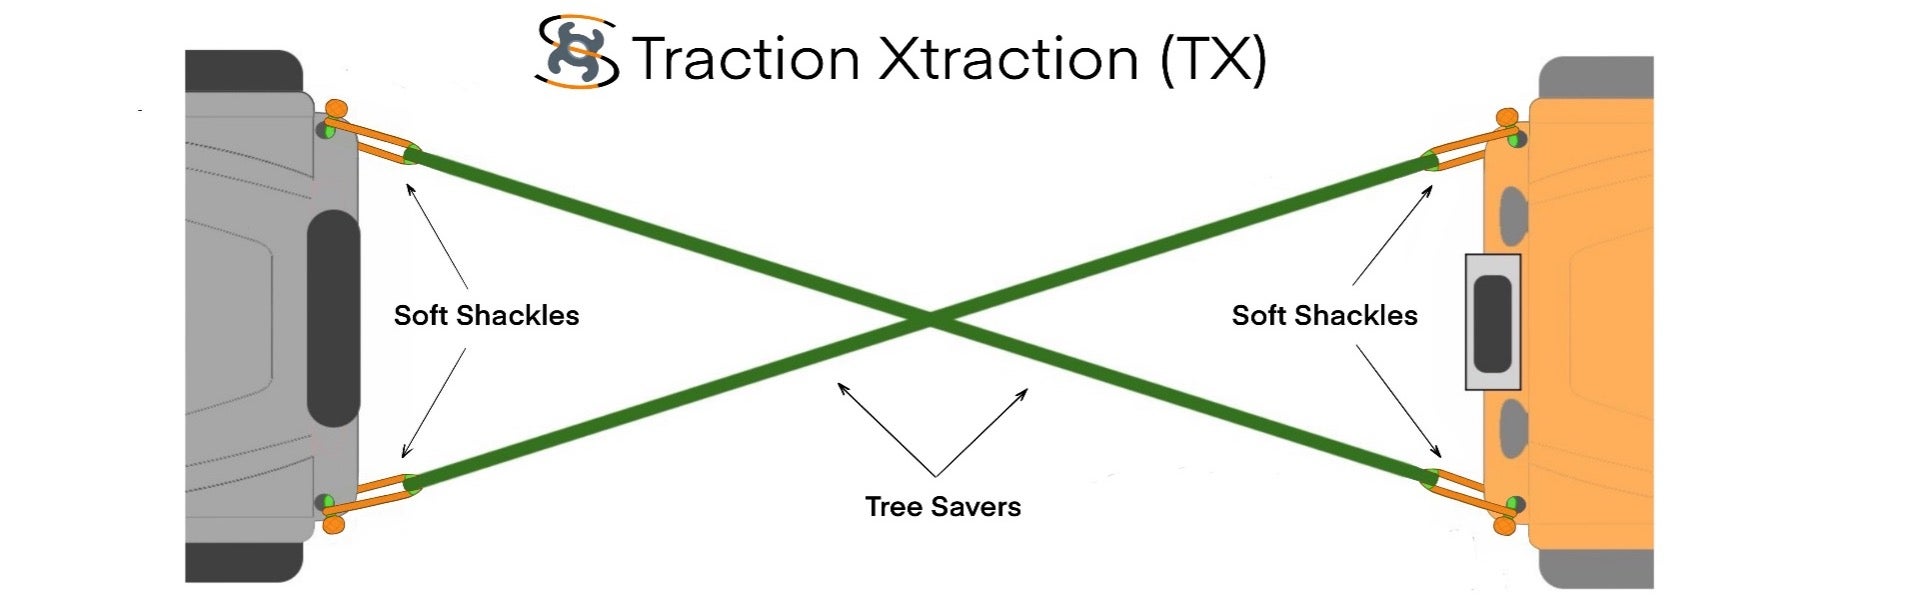 Traction Xtraction configuration